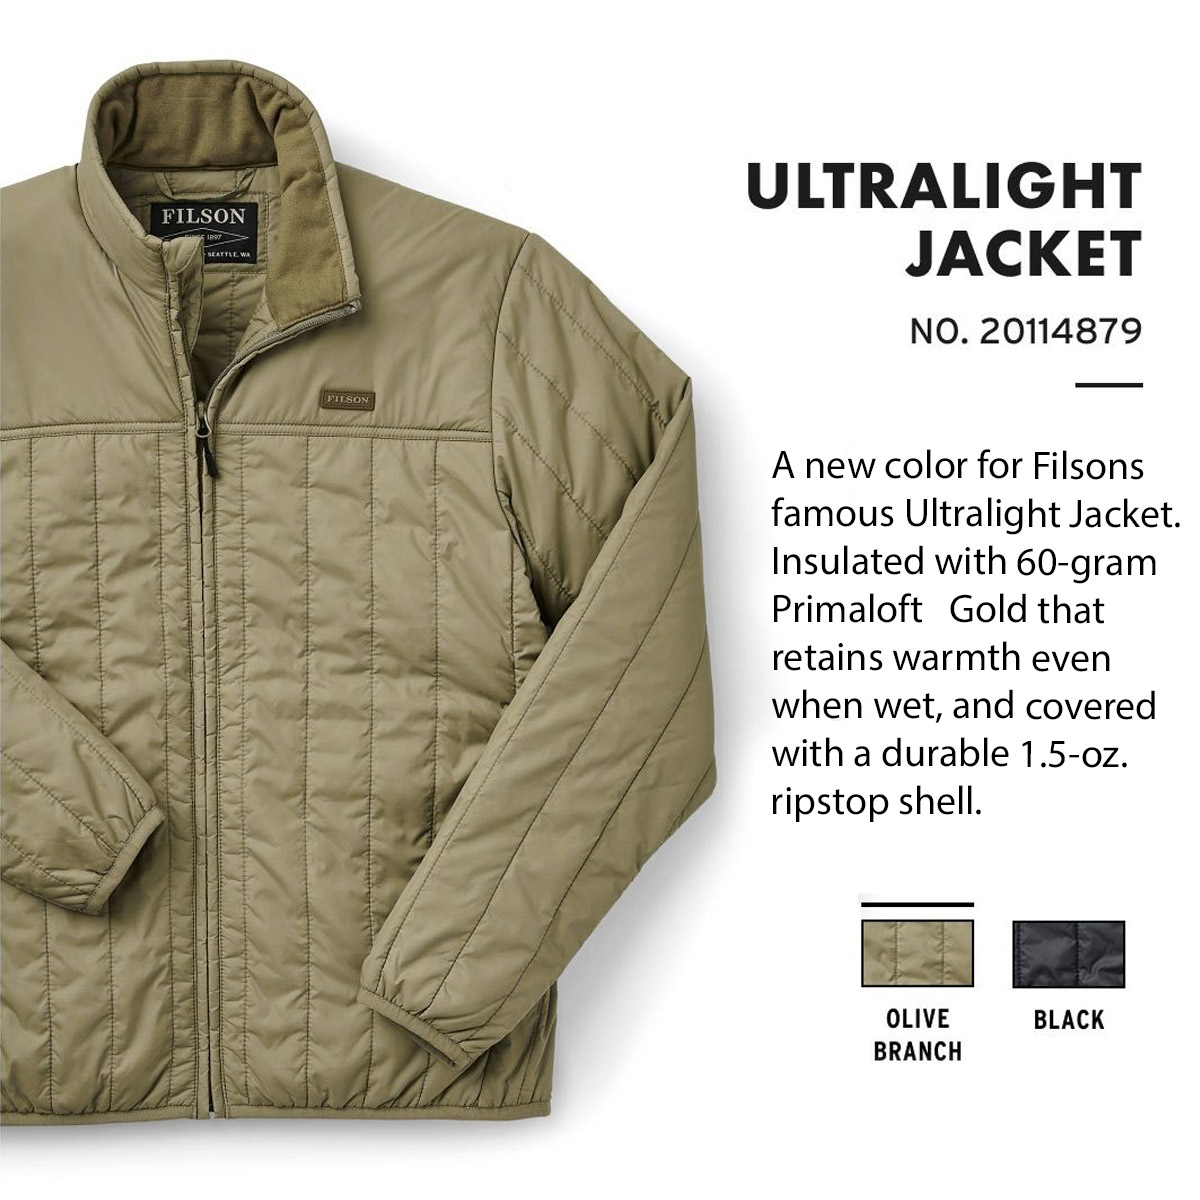 Filson Ultralight Jacket Olive Branch, perfect as an outer layer or underneath a heavy jacket for warmth in extreme cold